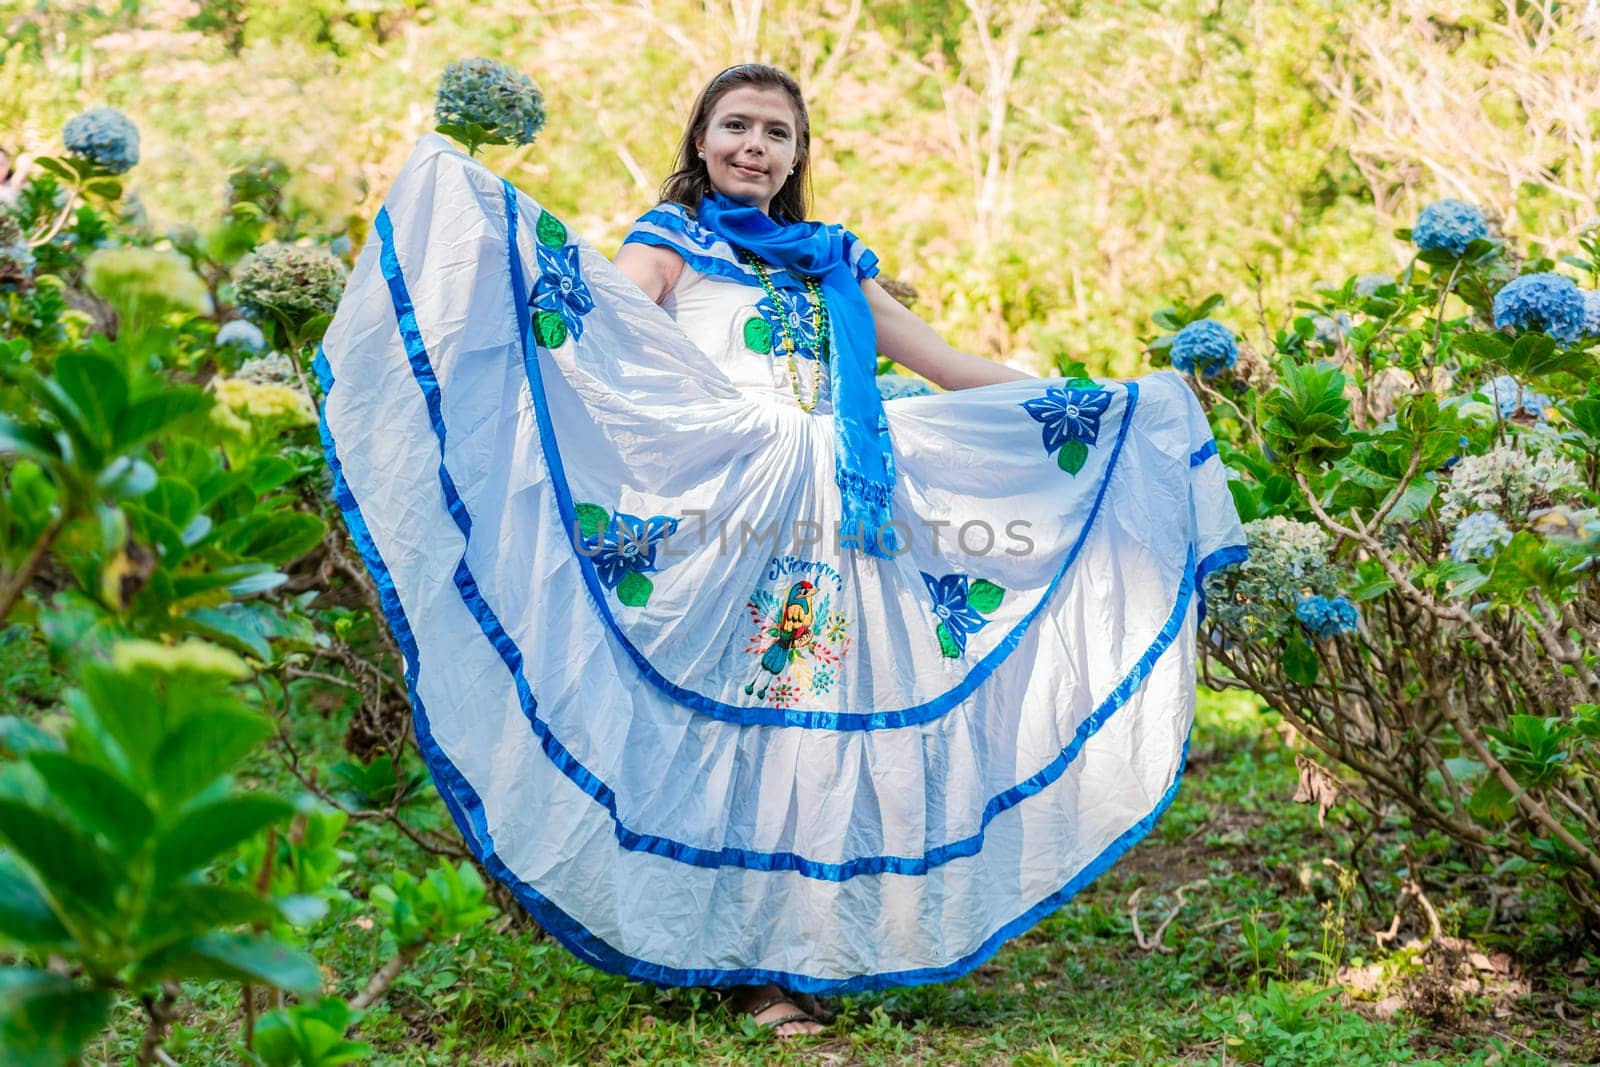 People in Nicaraguan national folk costume. Young Nicaraguan woman in traditional folk costume in a field of Milflores, Smiling woman in national folk costume in a field surrounded by flowers by isaiphoto